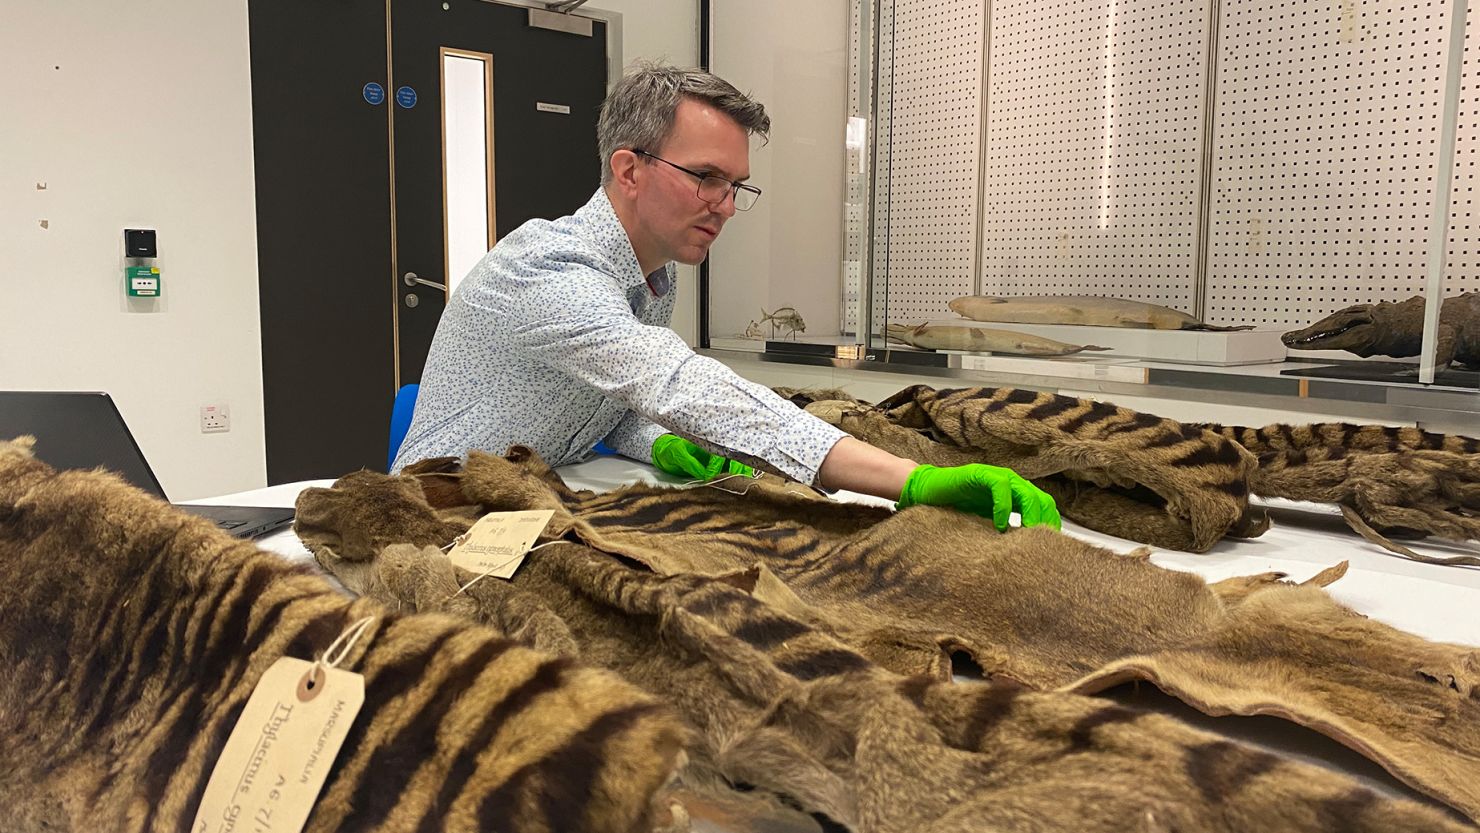 The University of Cambridge's collection of thylacines, or Tasmanian tigers, was sent to the museum by Morton Allport in 1869 and 1871. The collection represents the United Kingdom's largest collection of this species that originates from a single supplier.